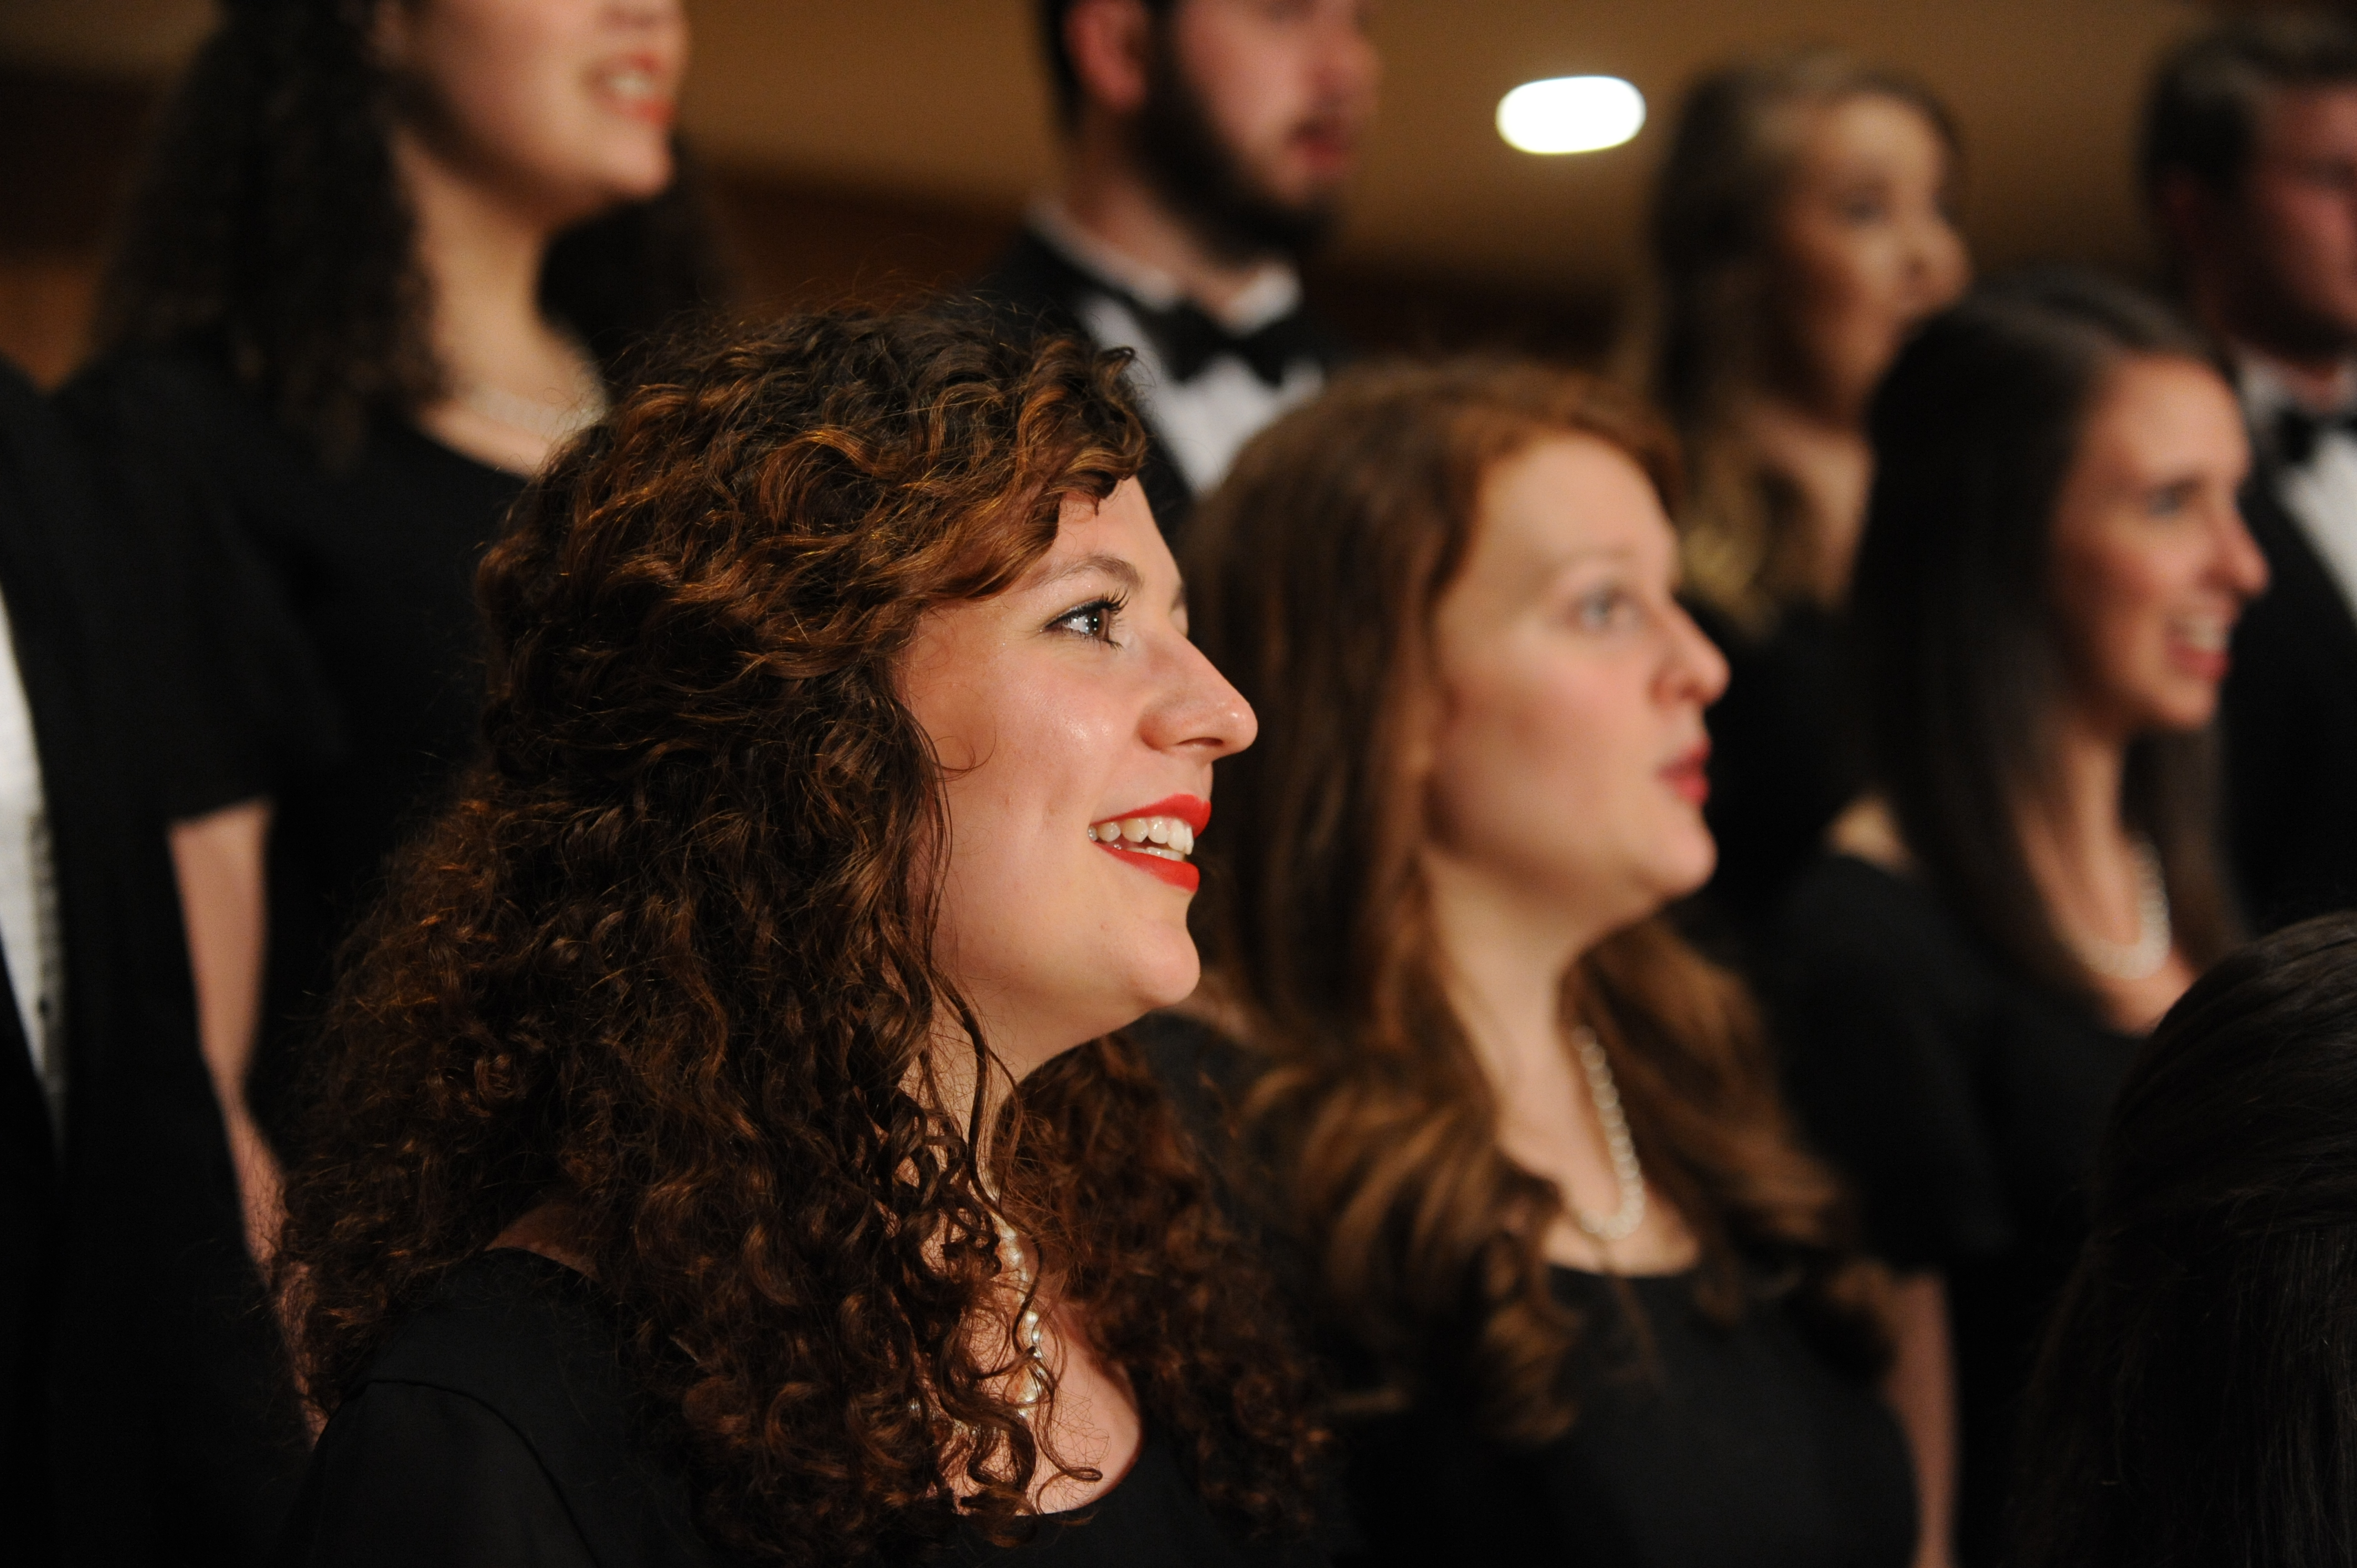 Ouachita Concert Choir to perform classics from across the ages April 27.